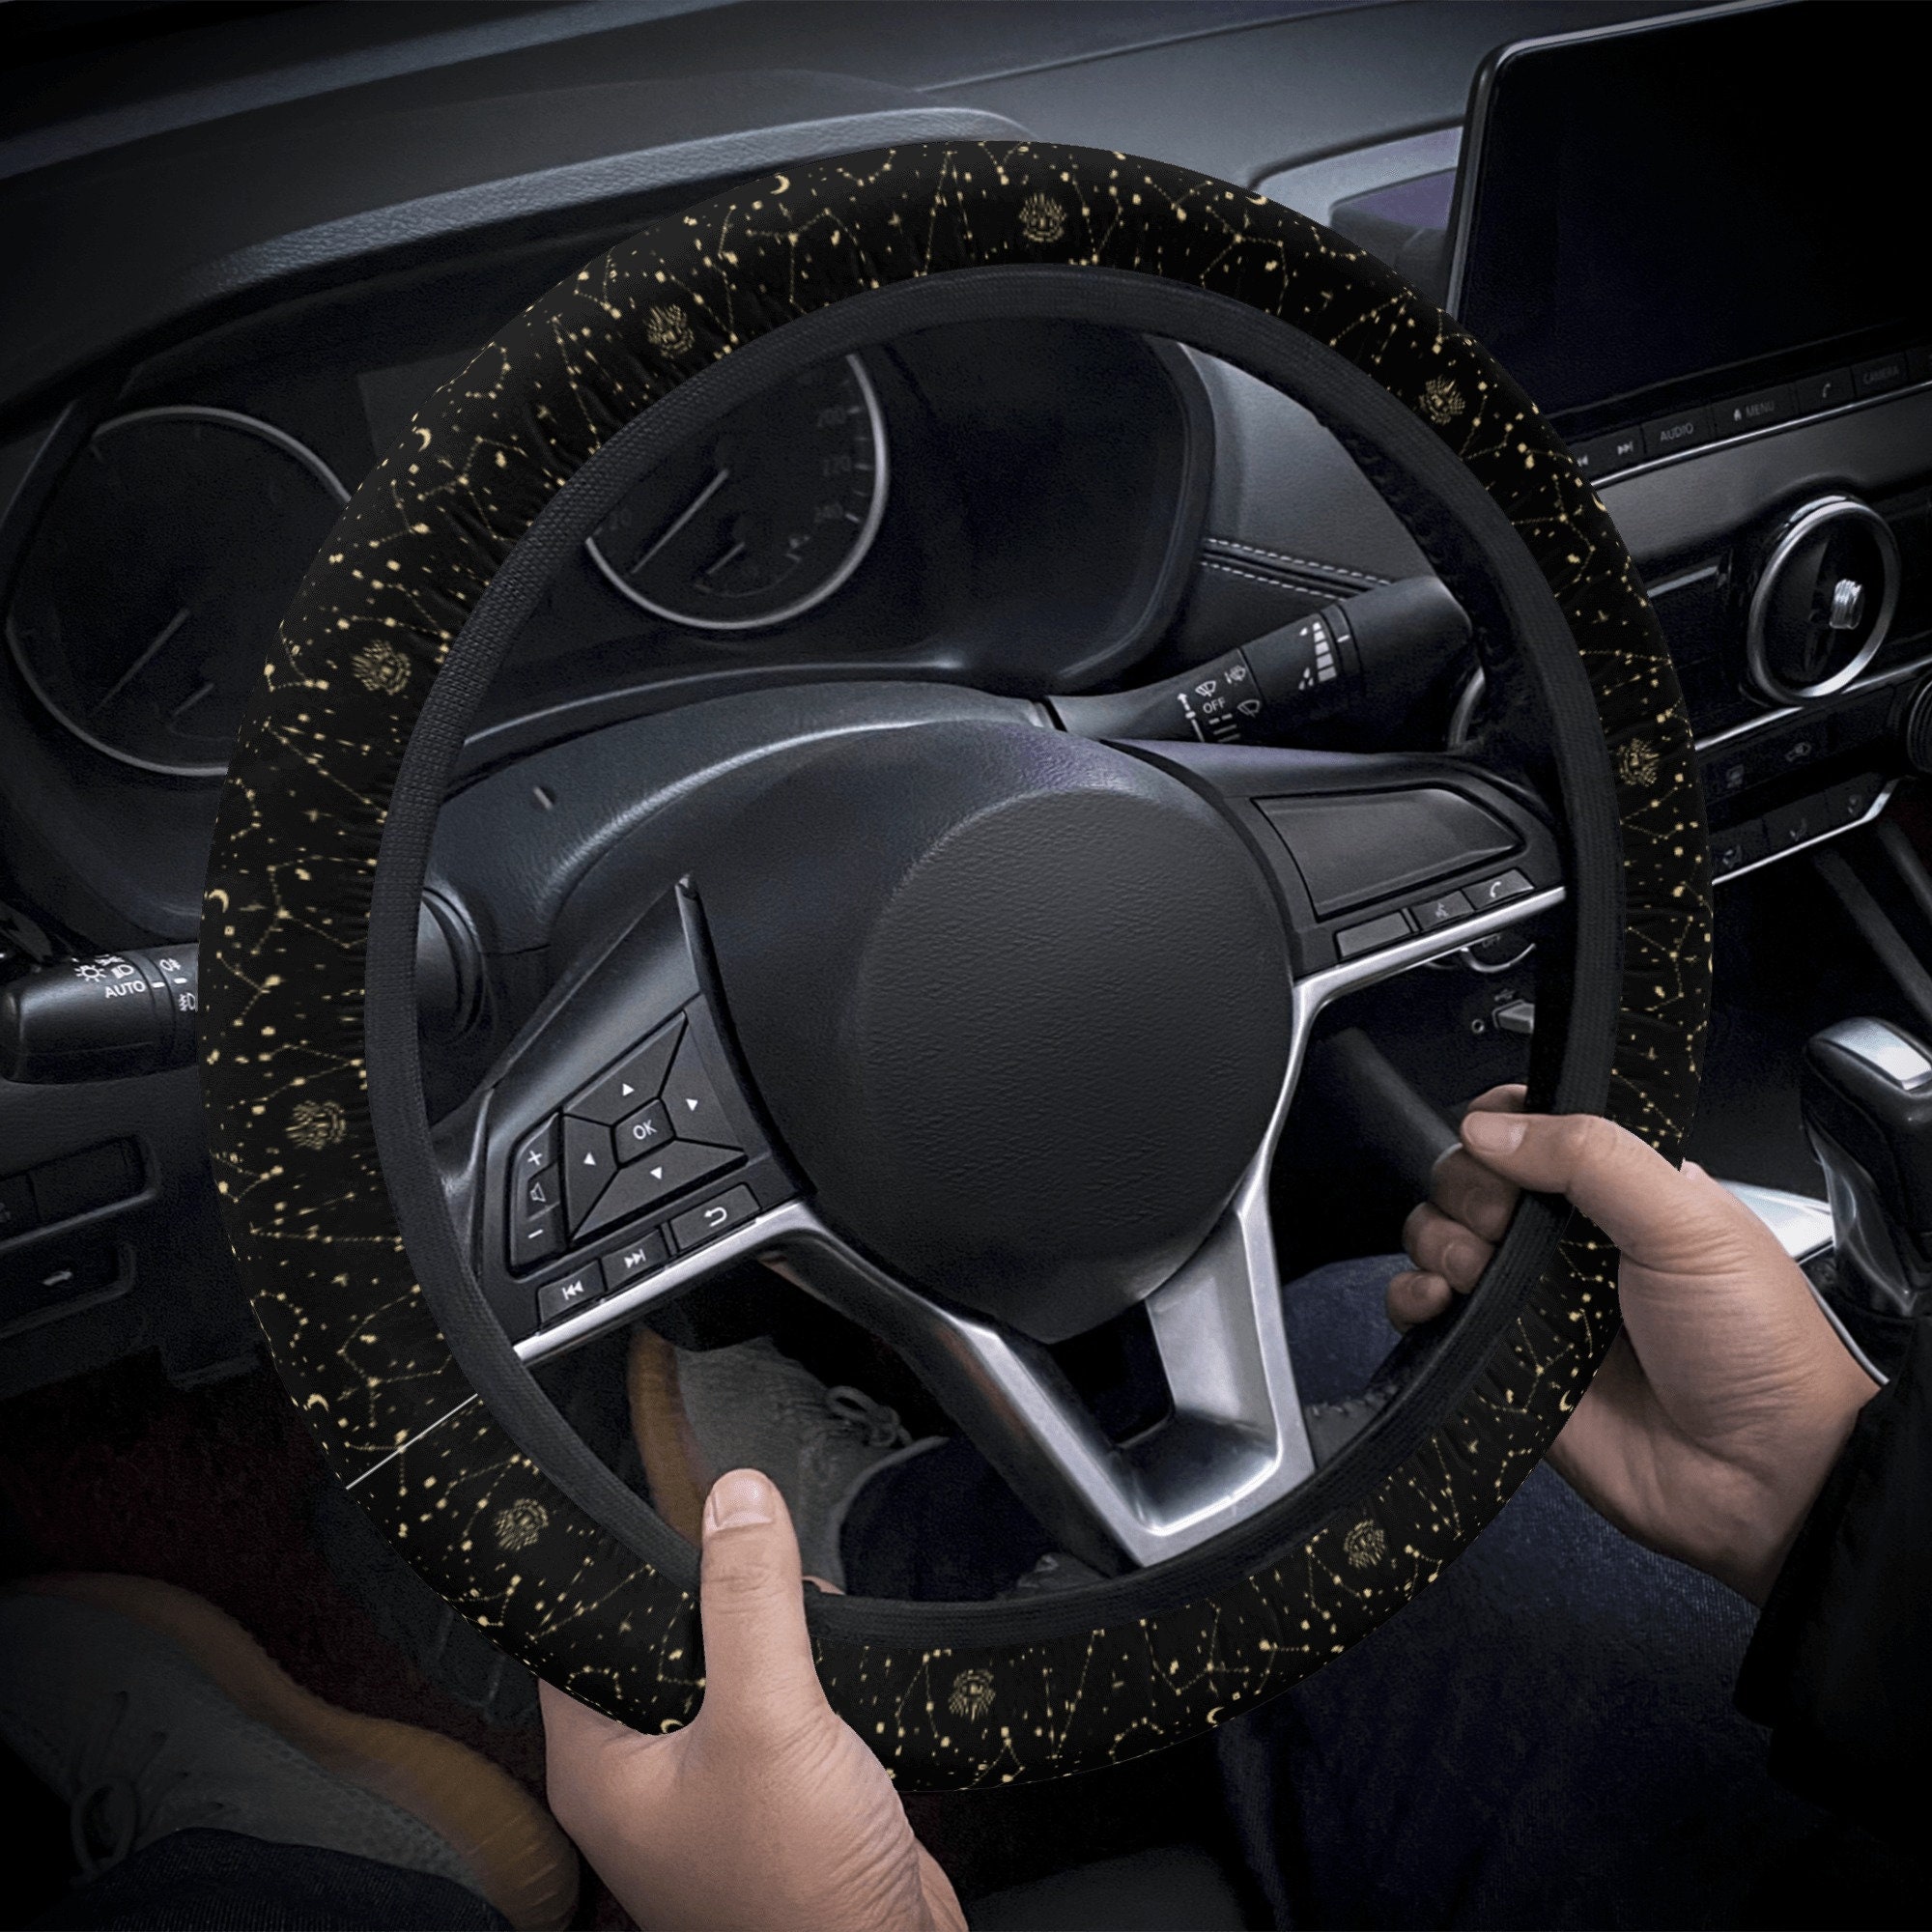 5 Pieces Bling Car Accessories Set Crystal Diamond Car Steering Wheel Cover  Faux Fur Auto Center Console Pad Cup Holders Rhinestone Ring Sticker for